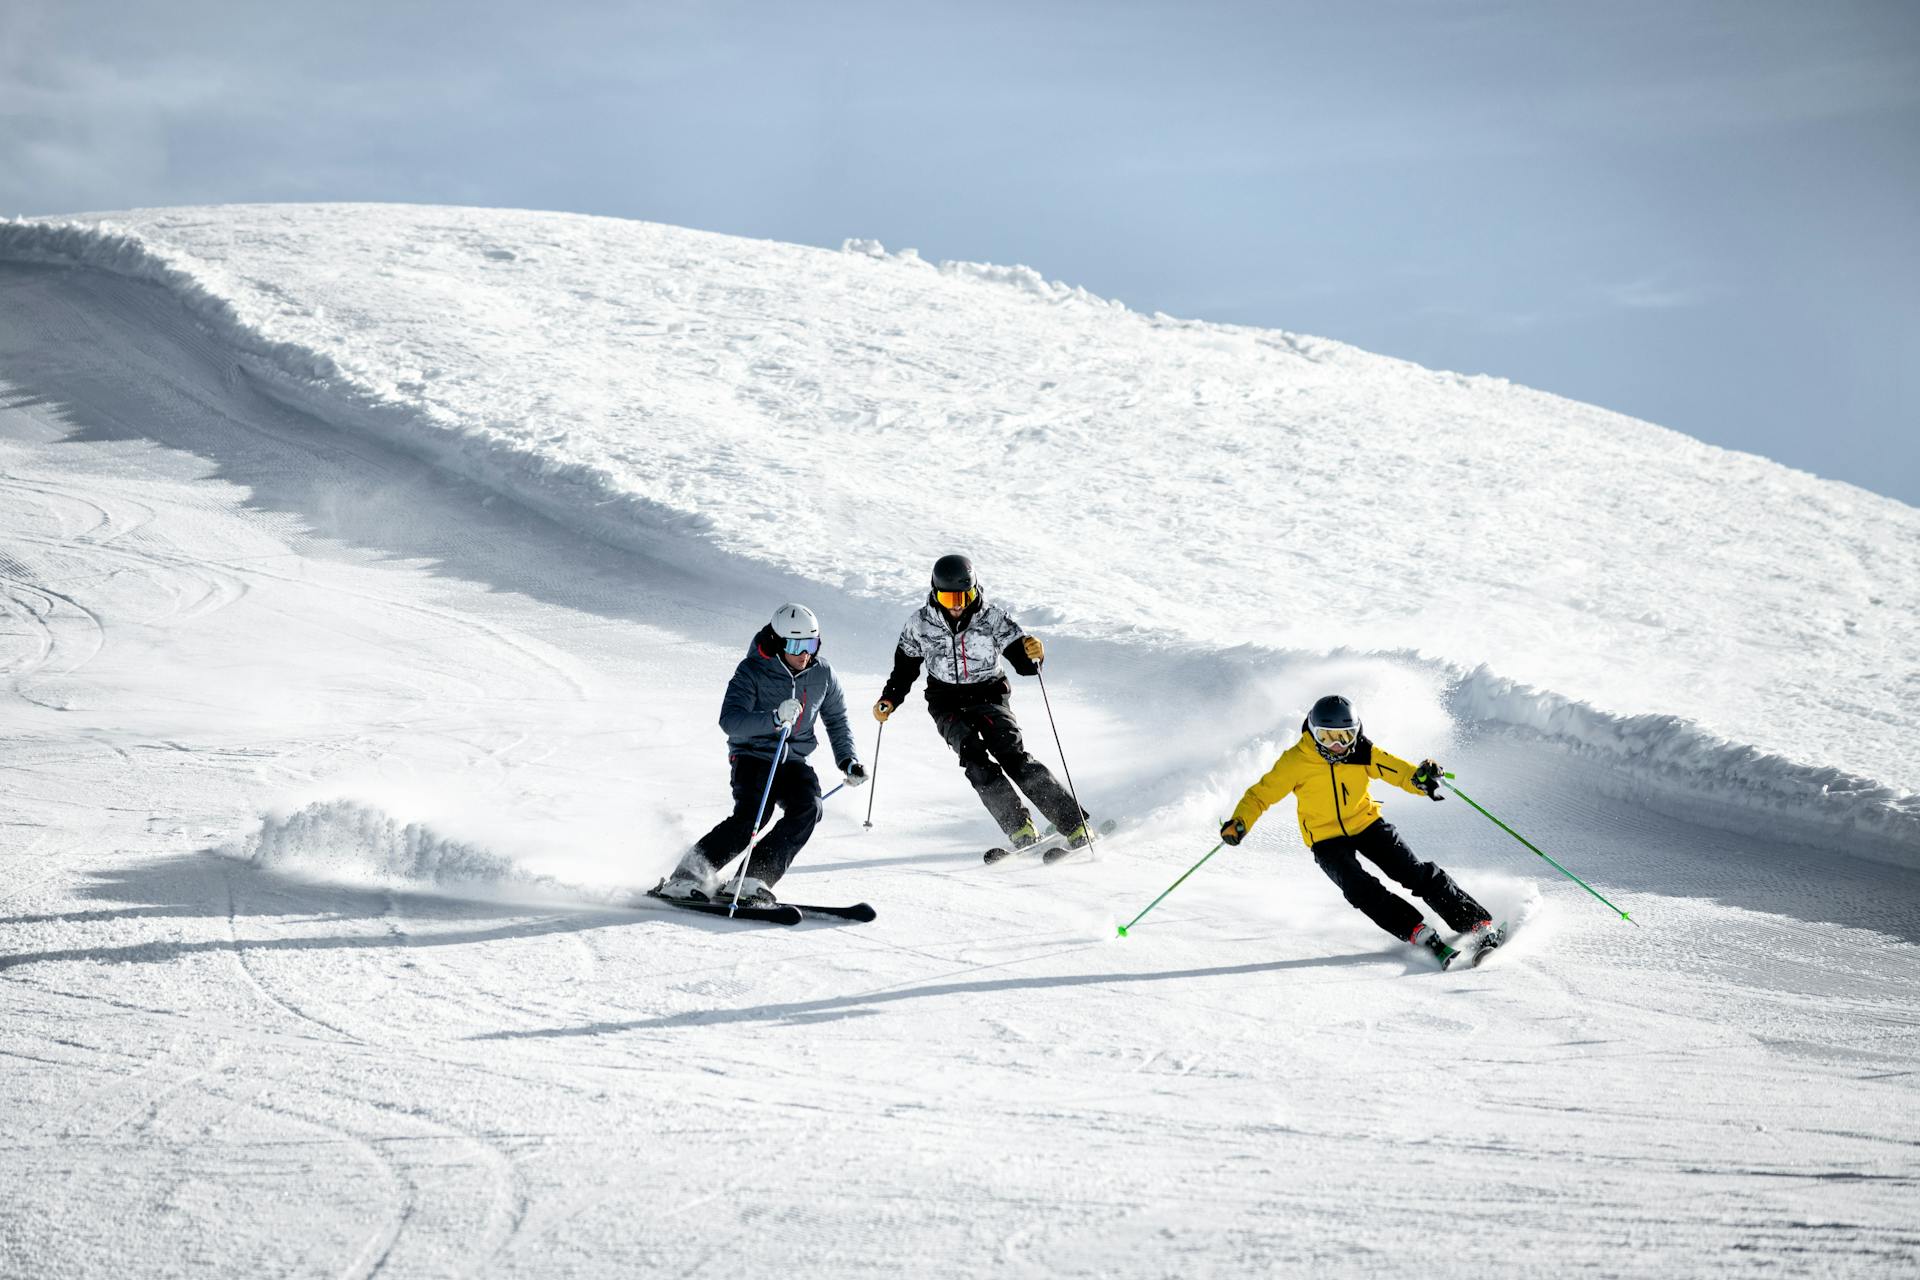 Three skiers racing down mountain together on intermediate slope